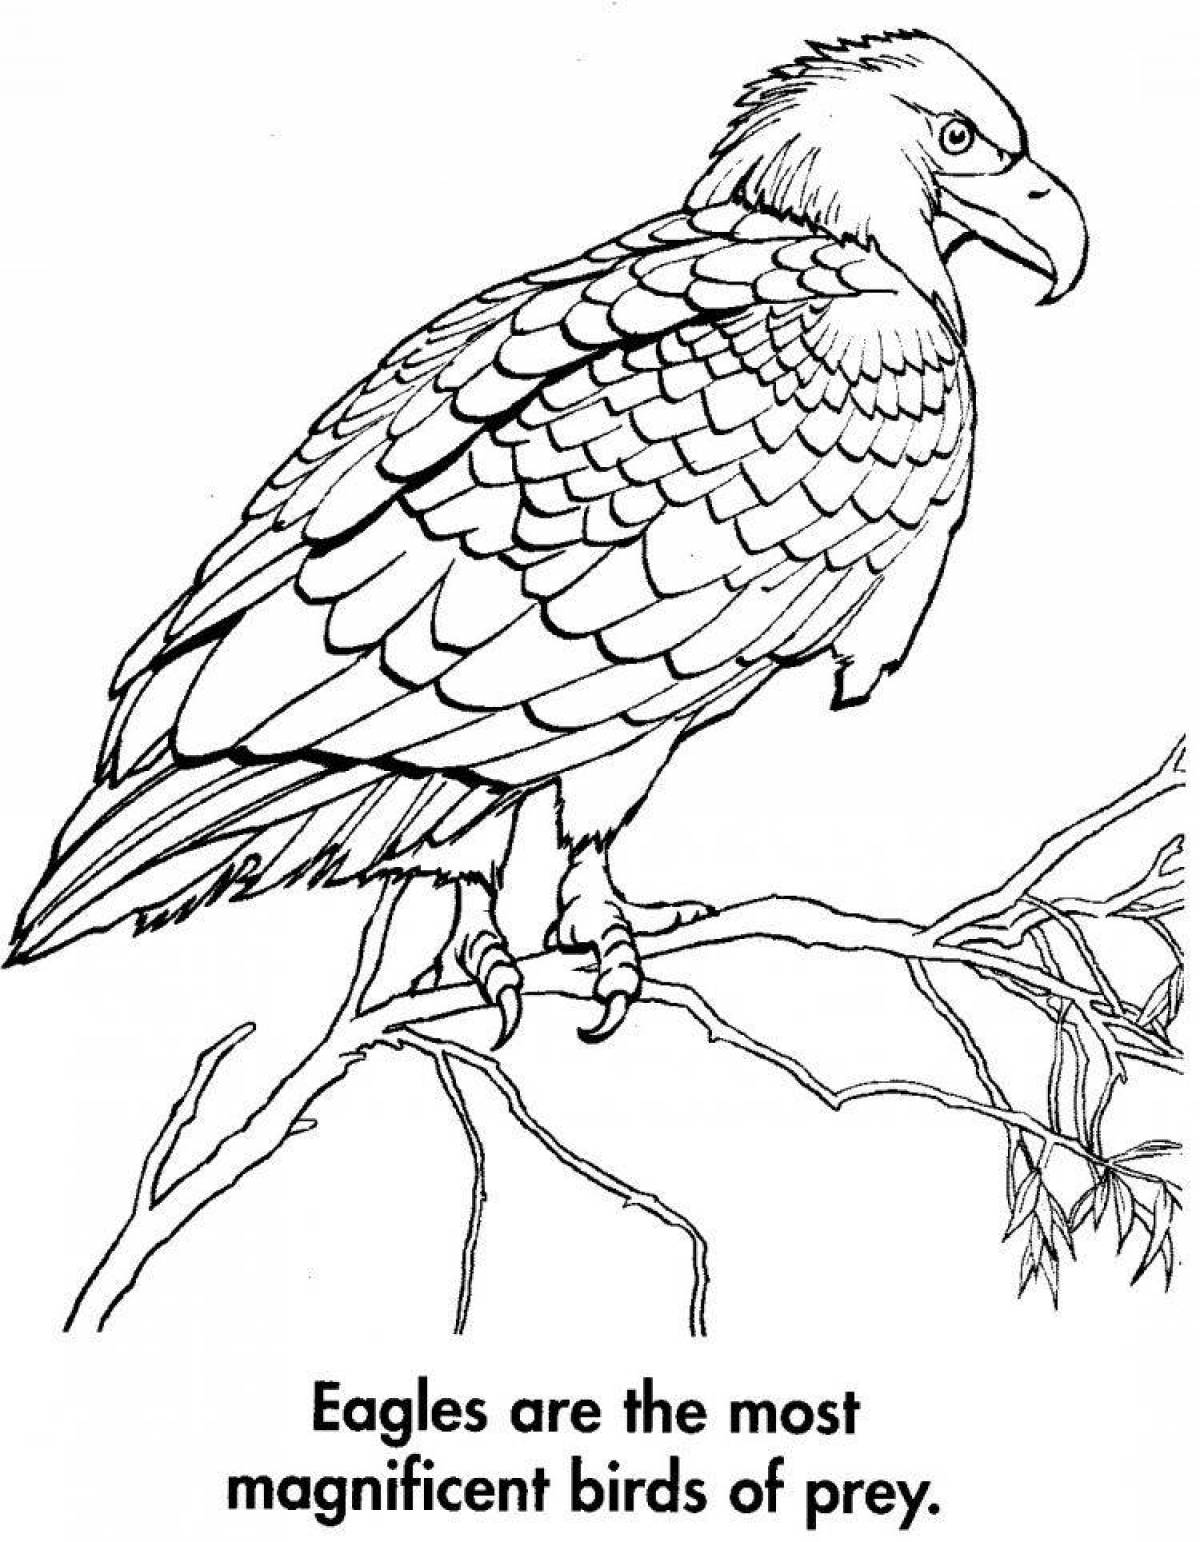 Exquisite bustard coloring page